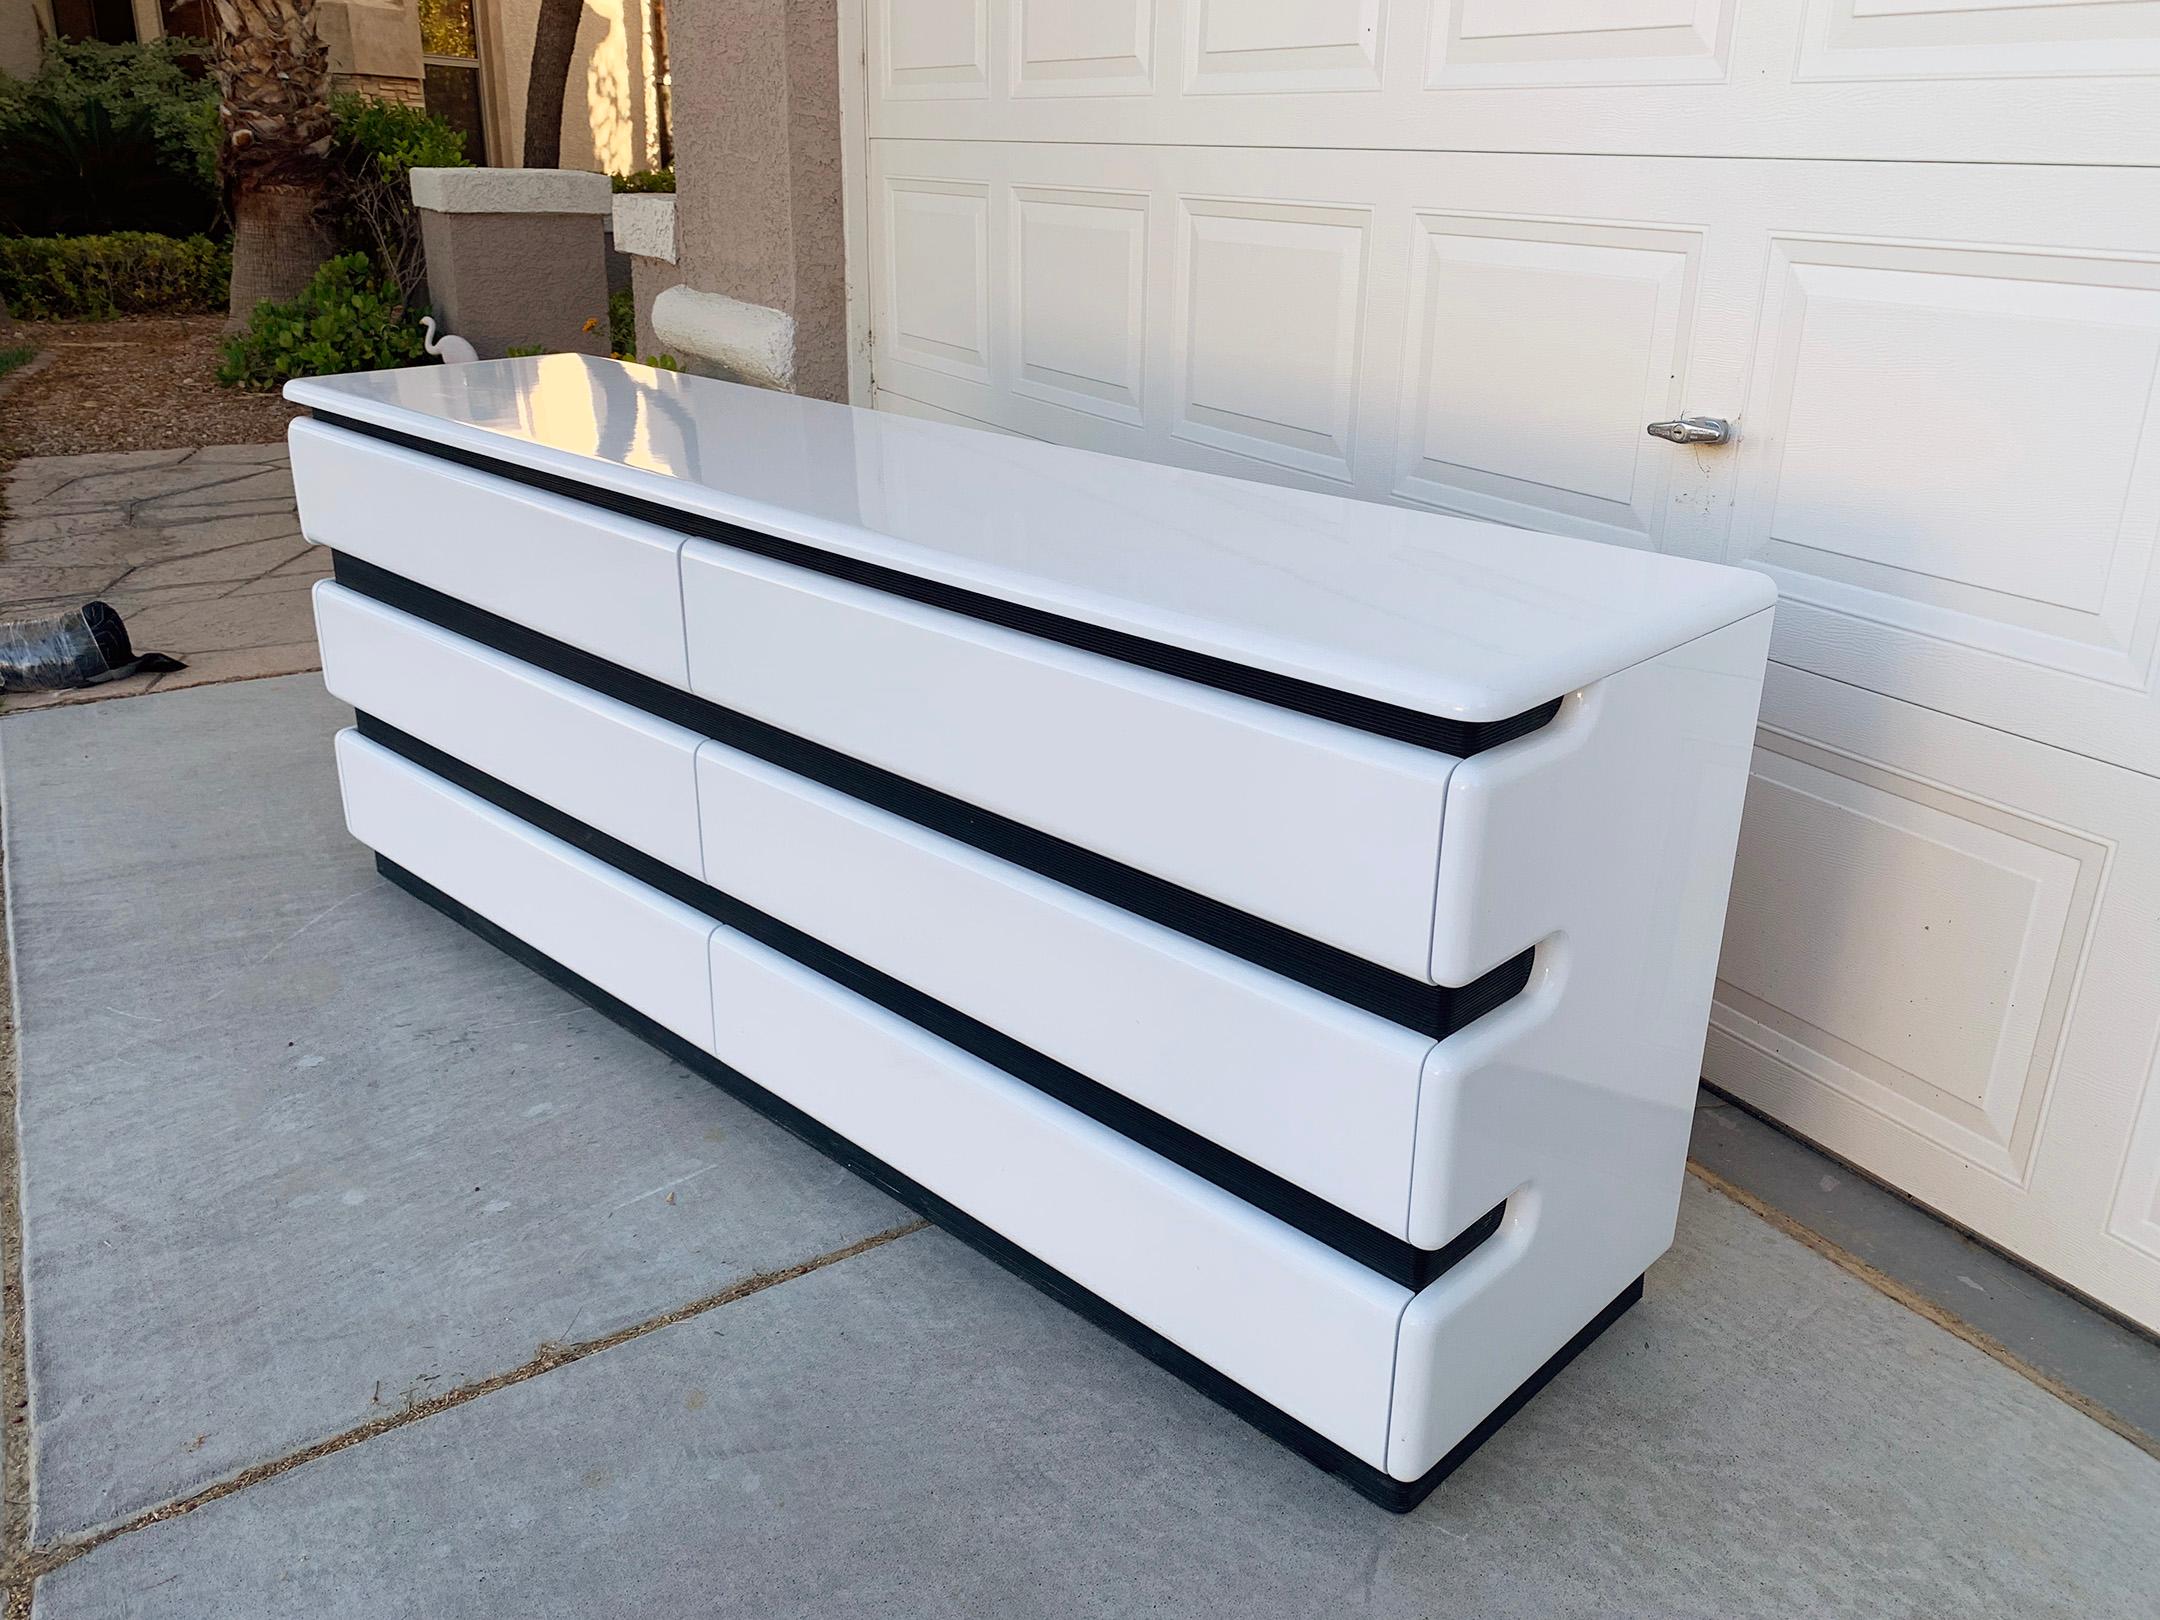 An absolutely stunning Postmodern dresser by Rougier. This dresser has clean white gloss with black accents and would look perfect in any modern, Mid-Century Modern, Space Age or Memphis style environment.

This dresser is in near perfect